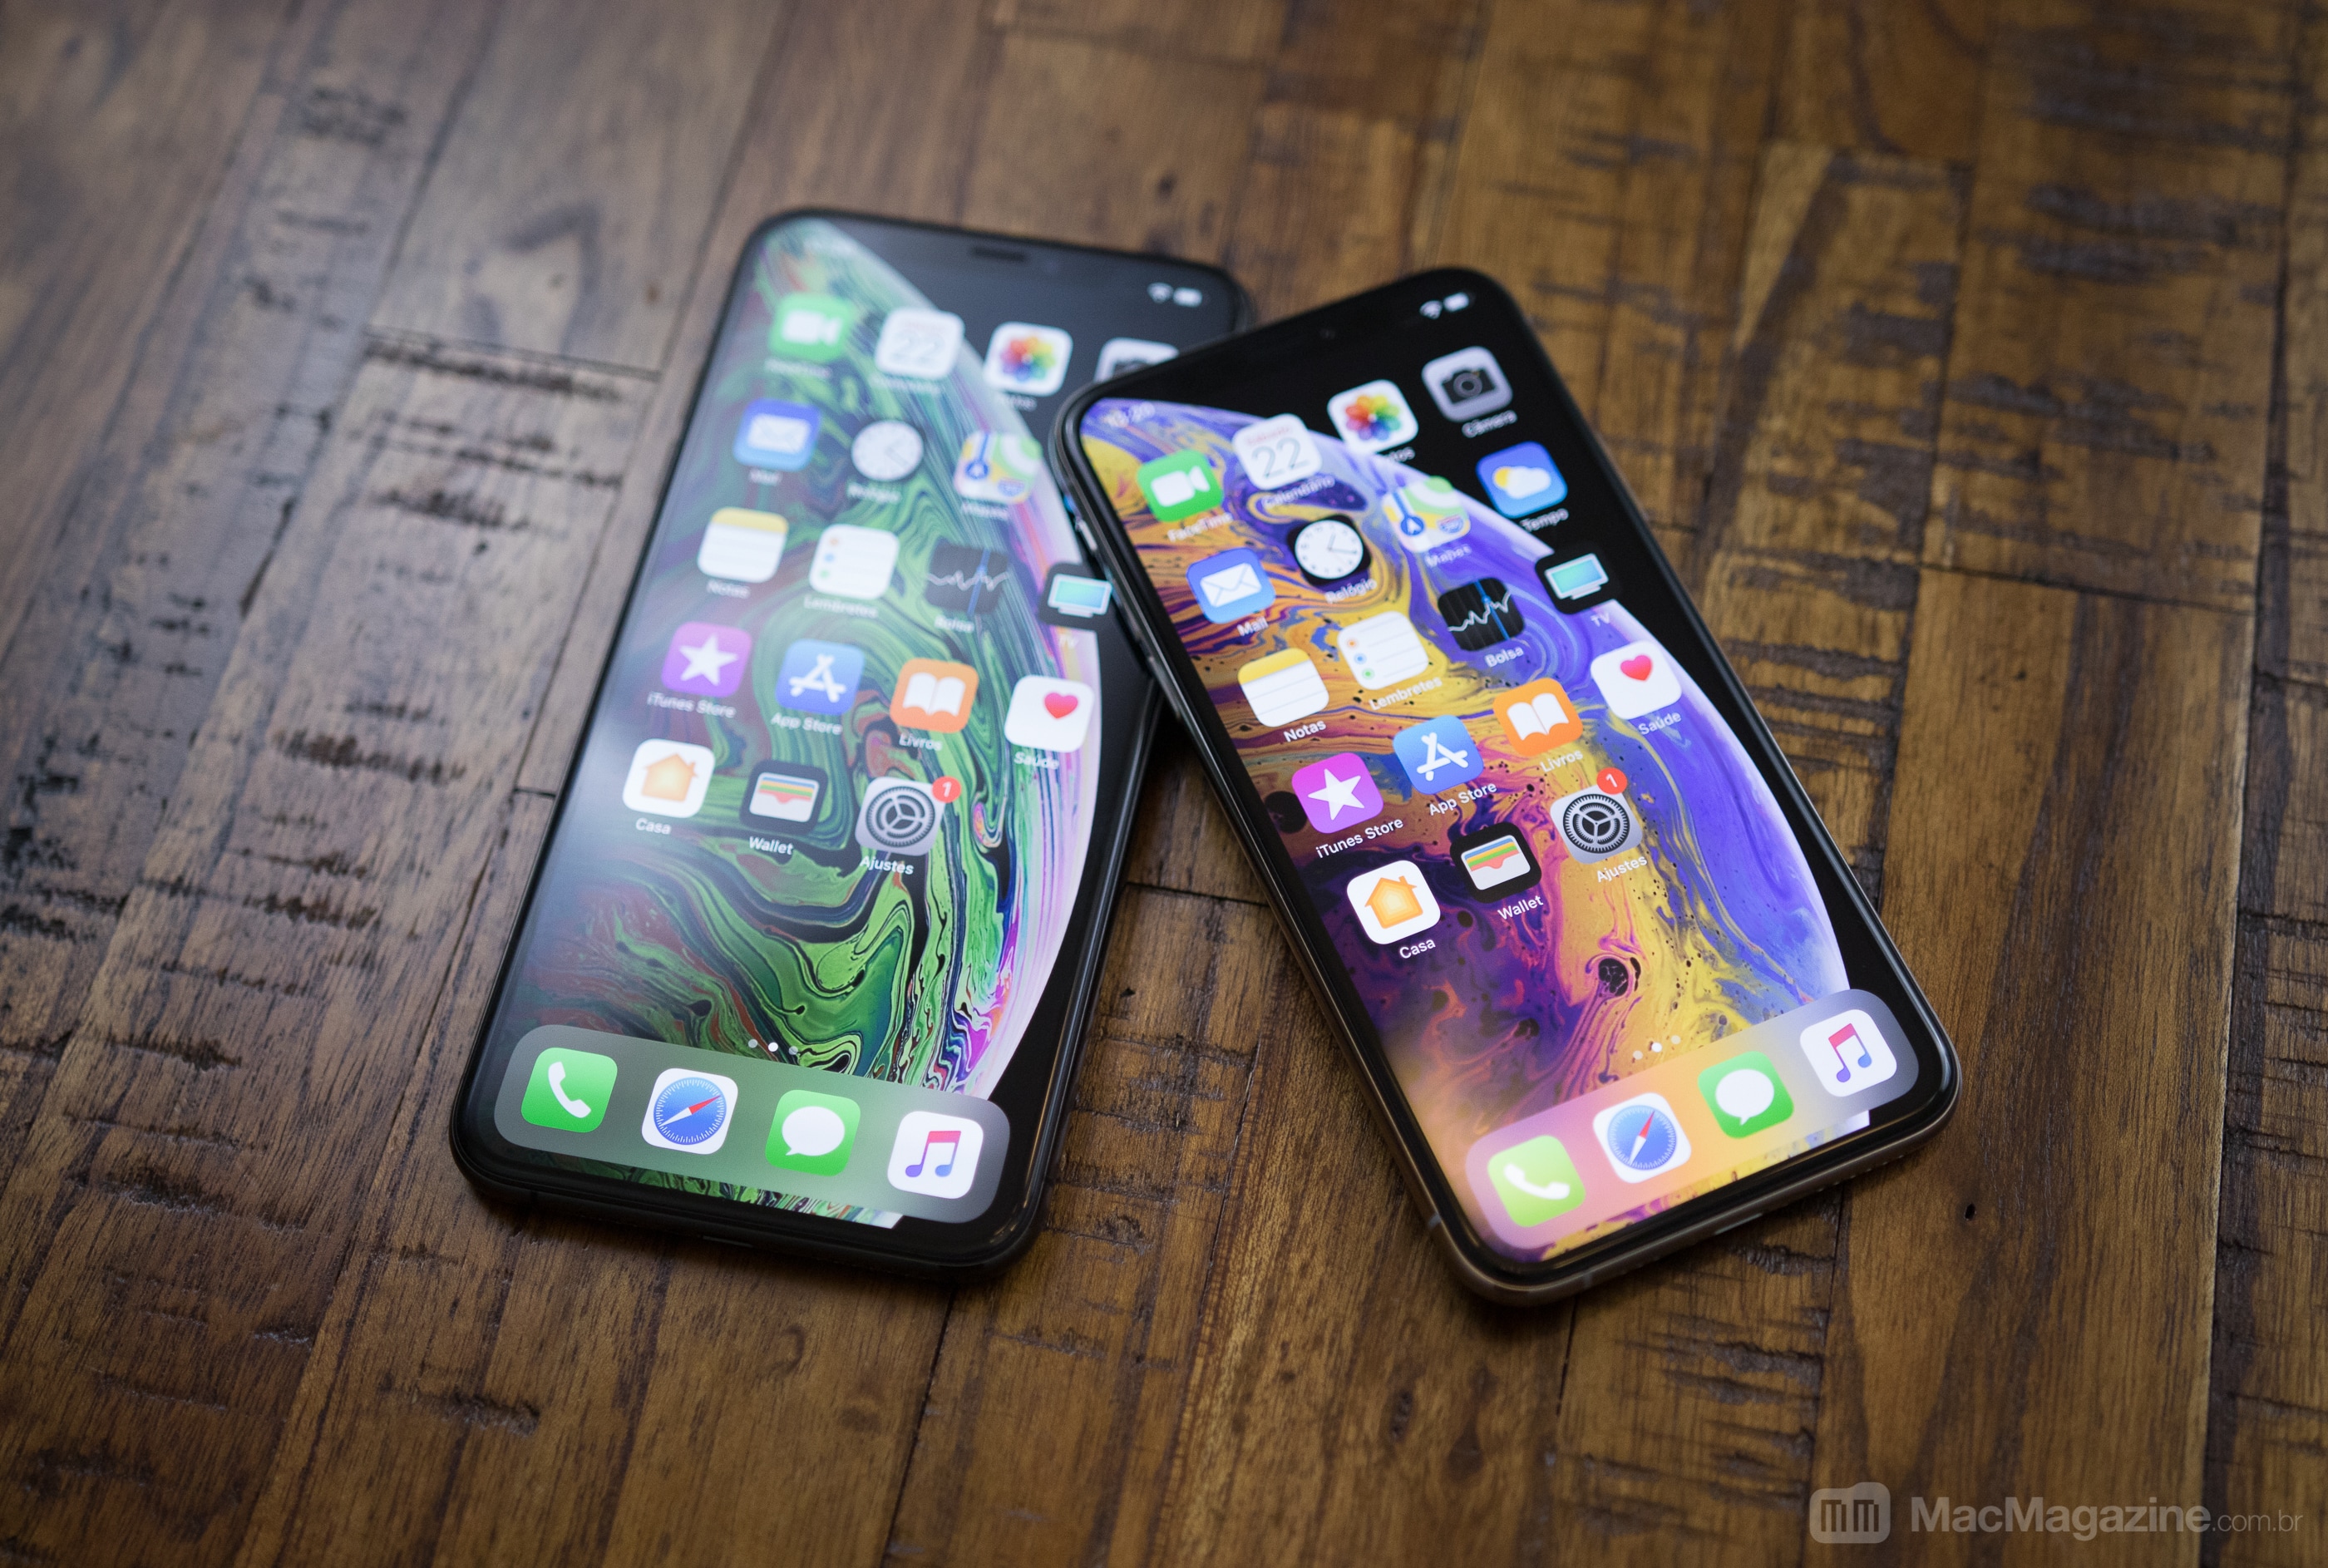 Photo of the XS and XS Max iPhones (by MacMagazine)